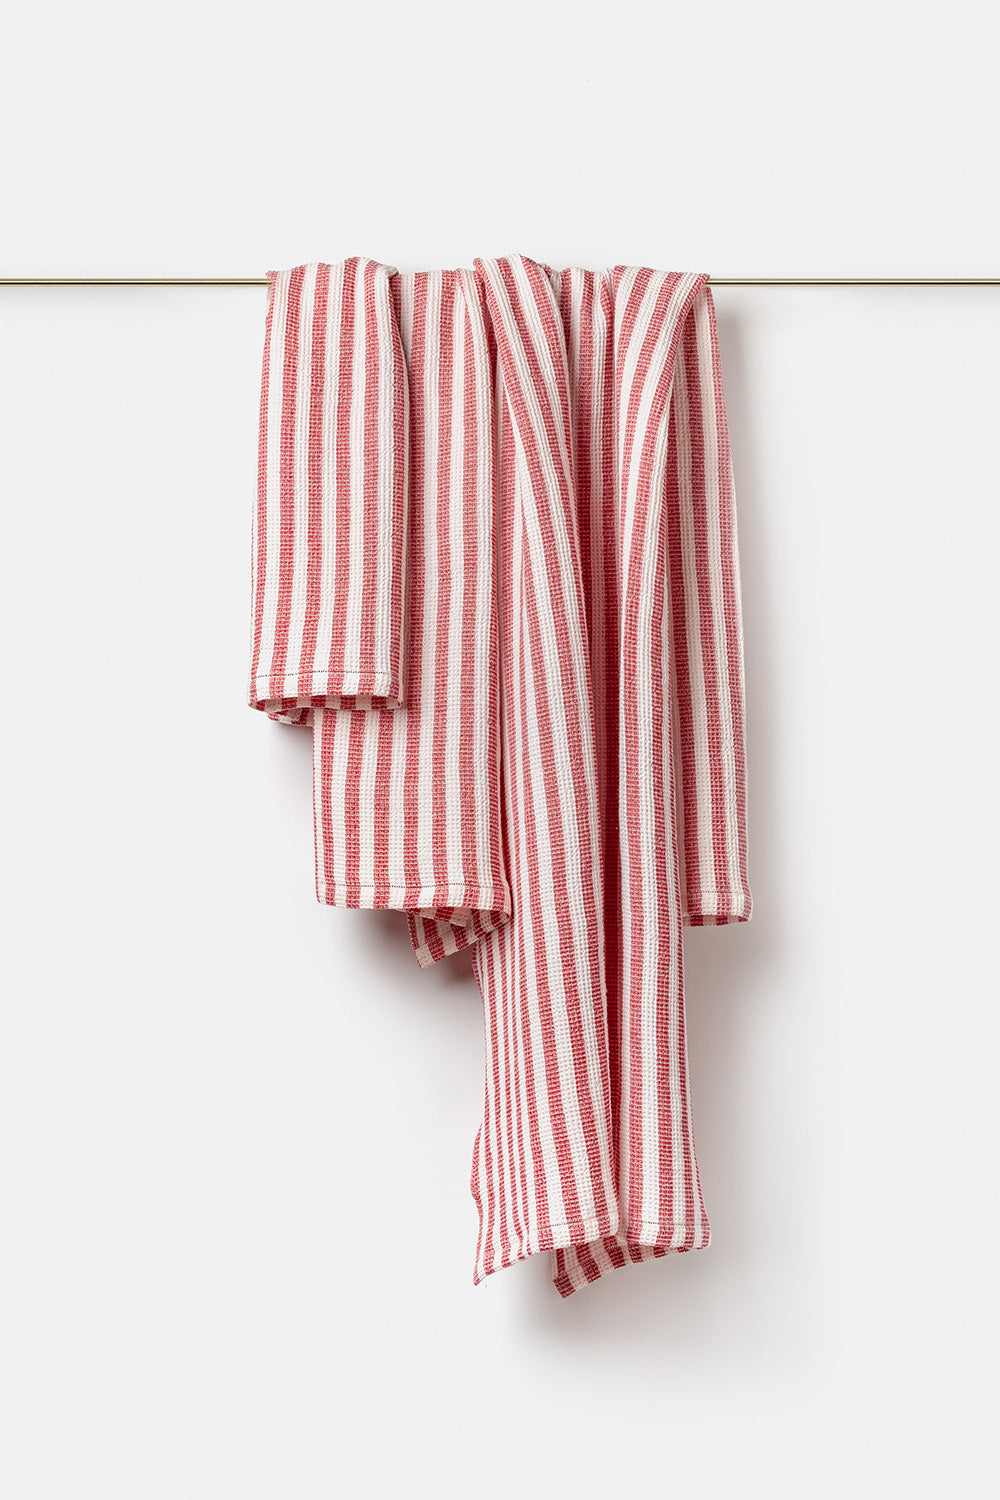 Montecatini rigato towels in White / Red – www.